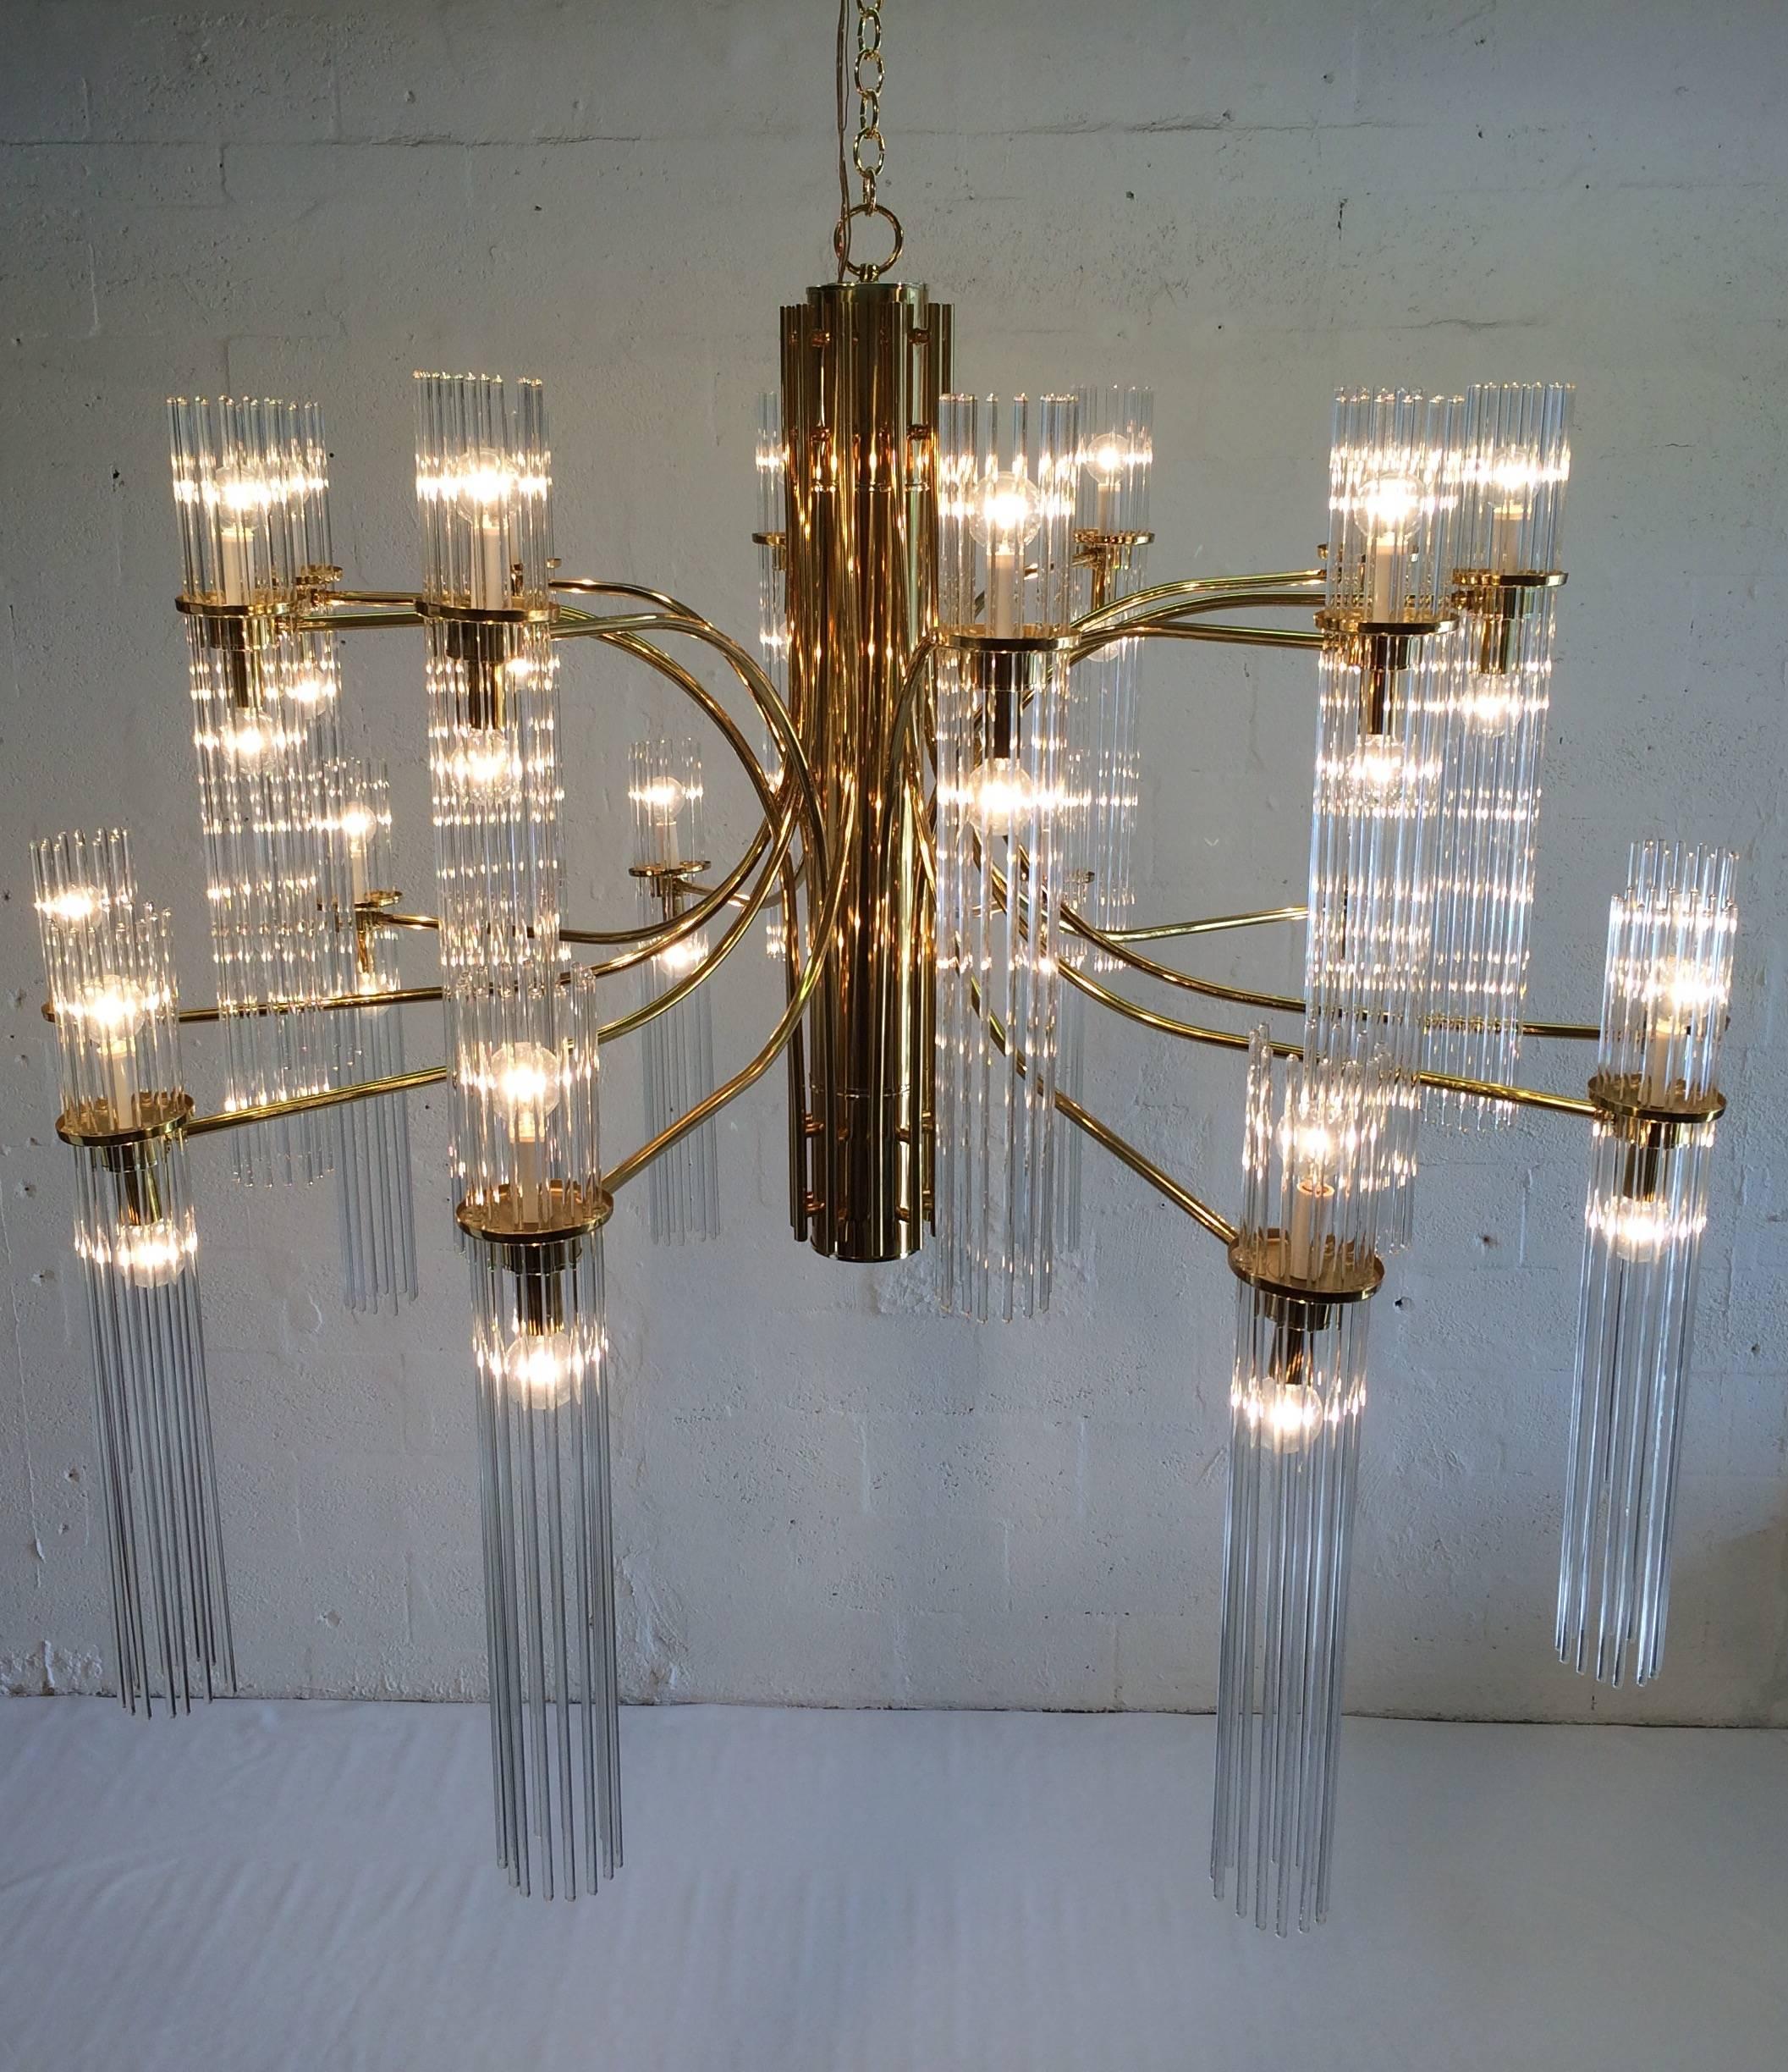 Huge brass and glass chandelier, 50” in diameter, chandelier has 20 arms with 260 glass rods.